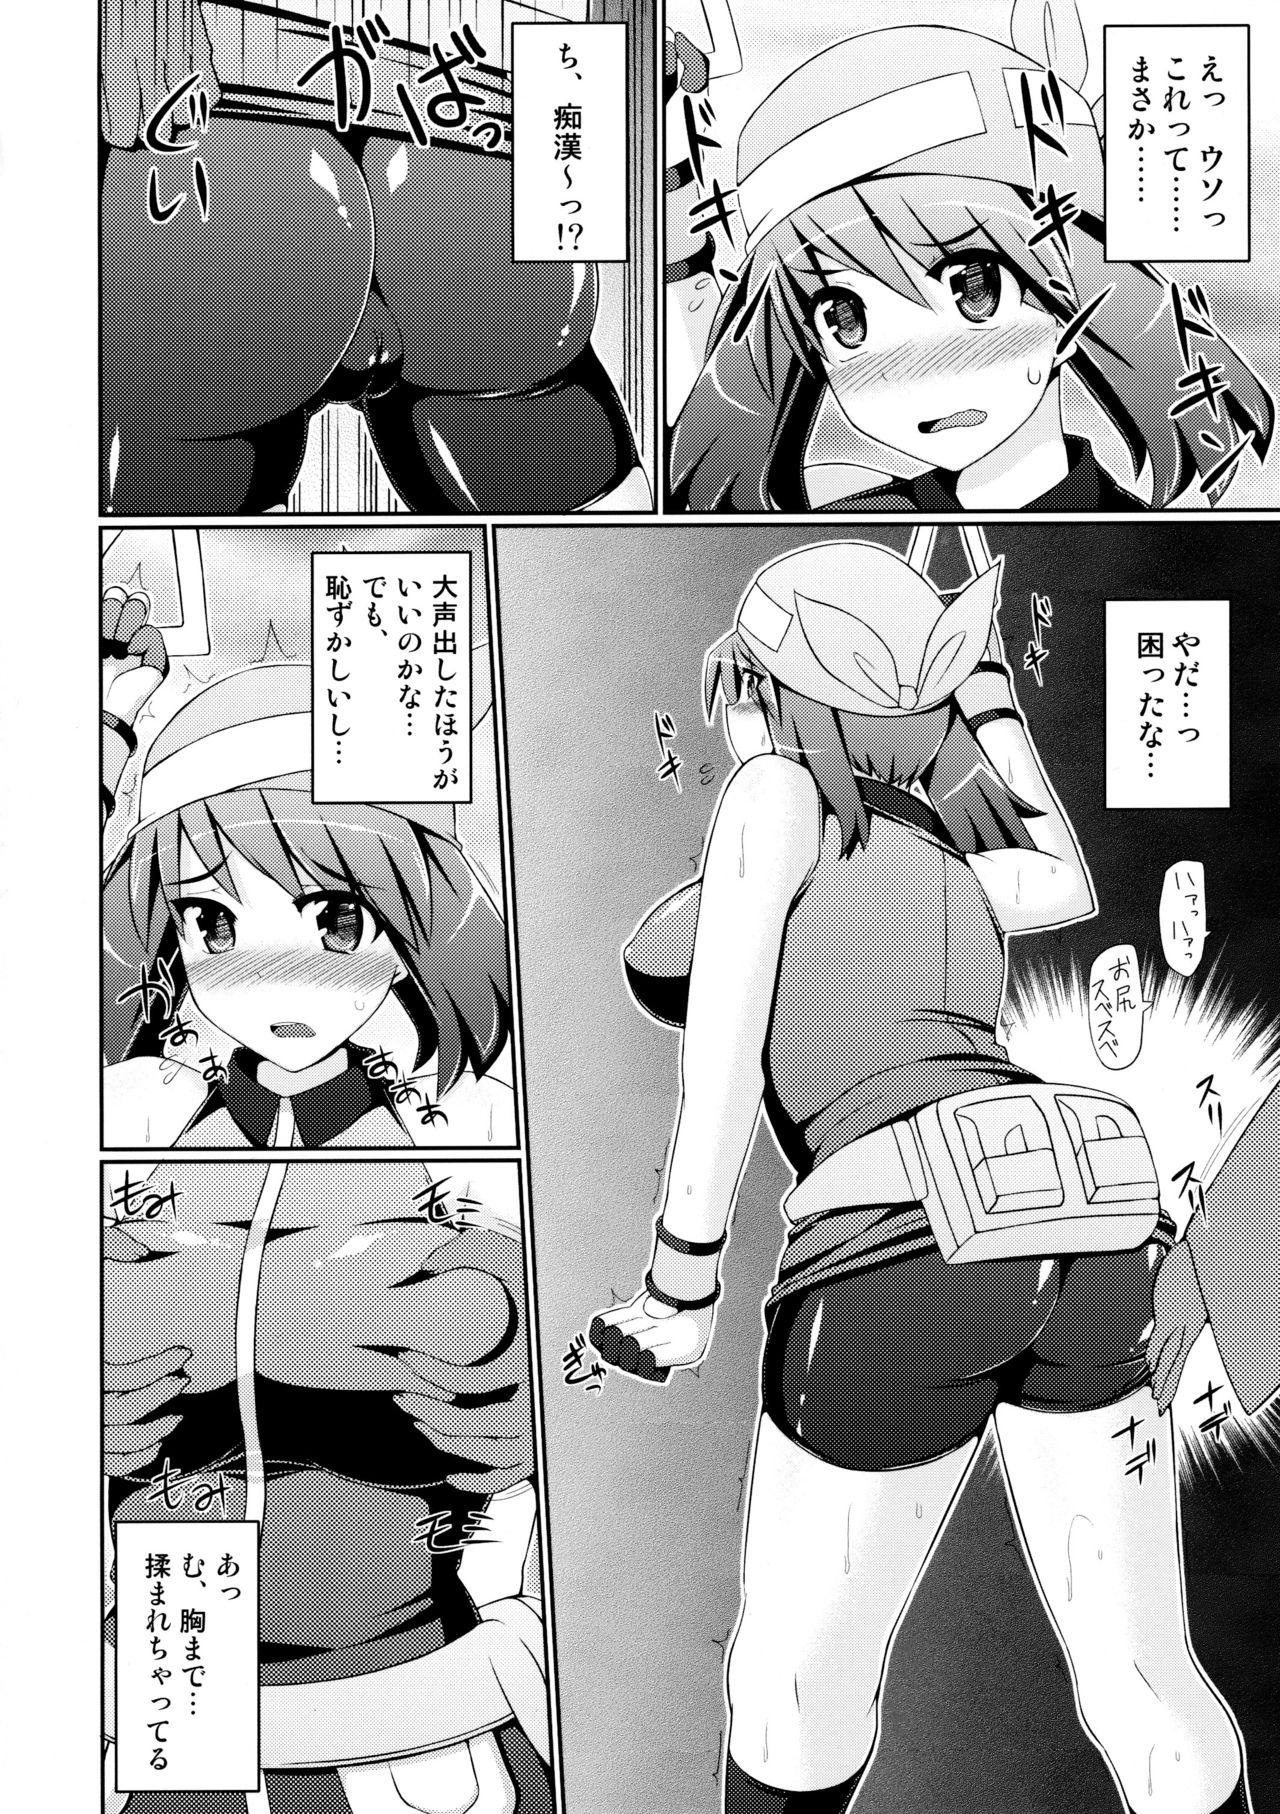 Cum Swallowing Super Groper Train - Chou Chikan Sharyou - Pokemon | pocket monsters Barely 18 Porn - Page 10